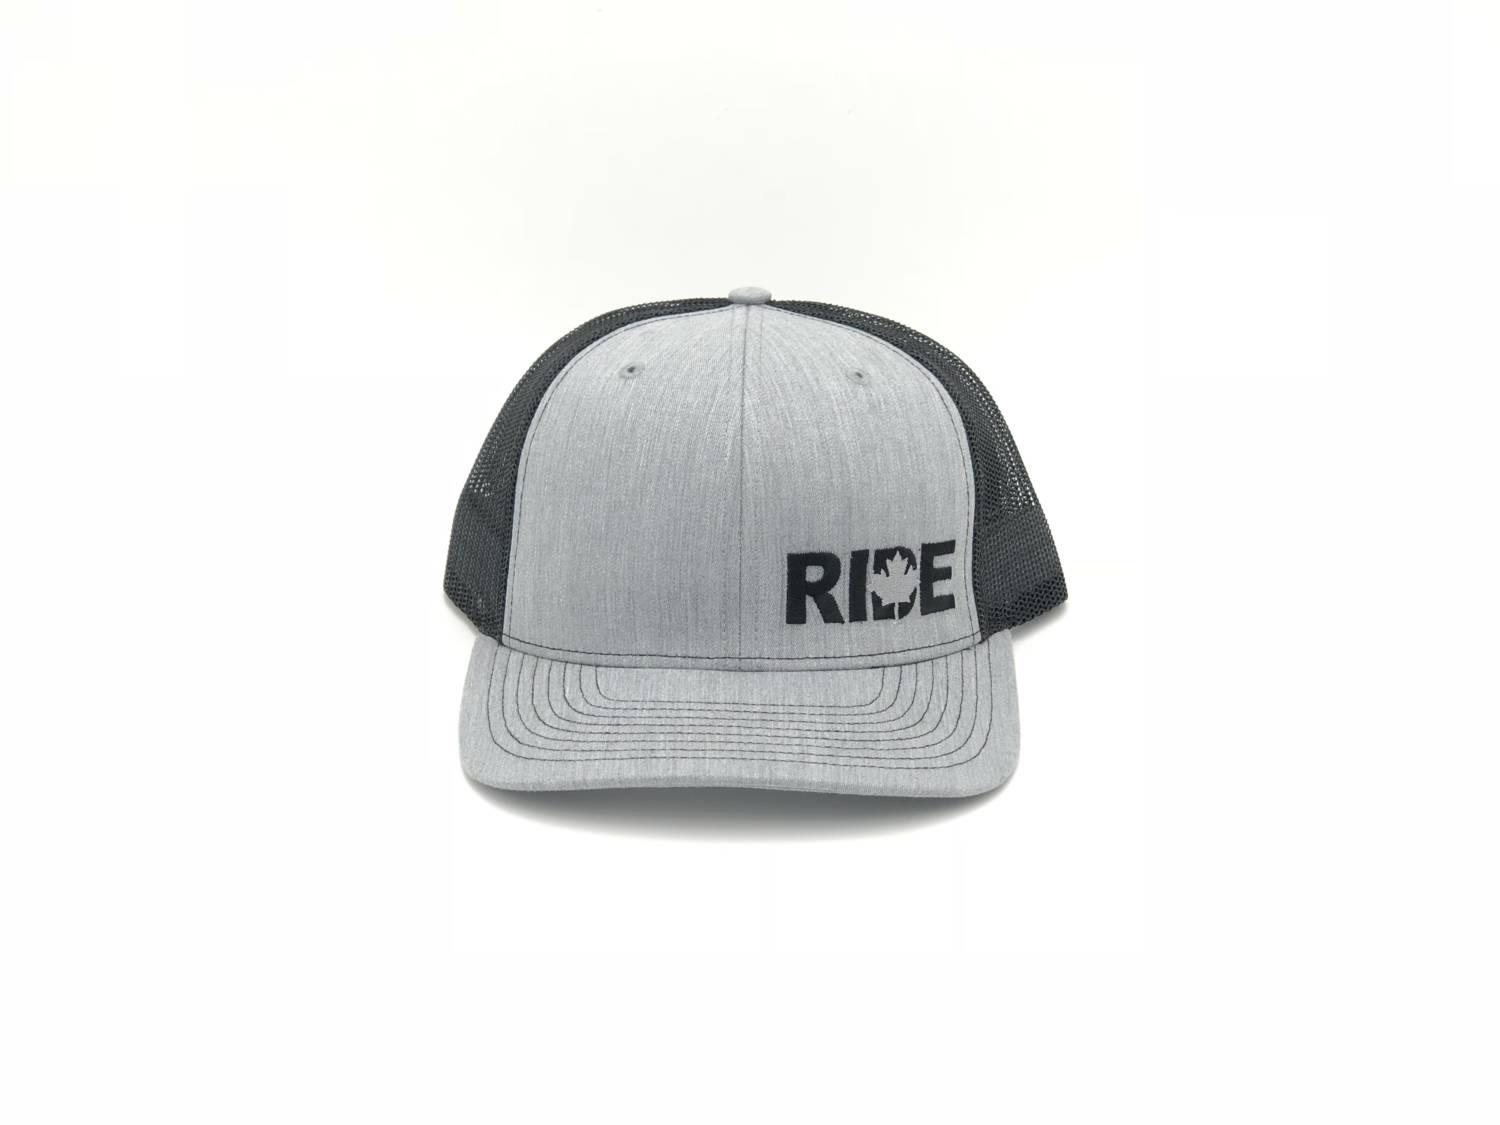 Ride Canada Night Out Pro Embroidered Snapback Trucker Hat Heather Gray/Black